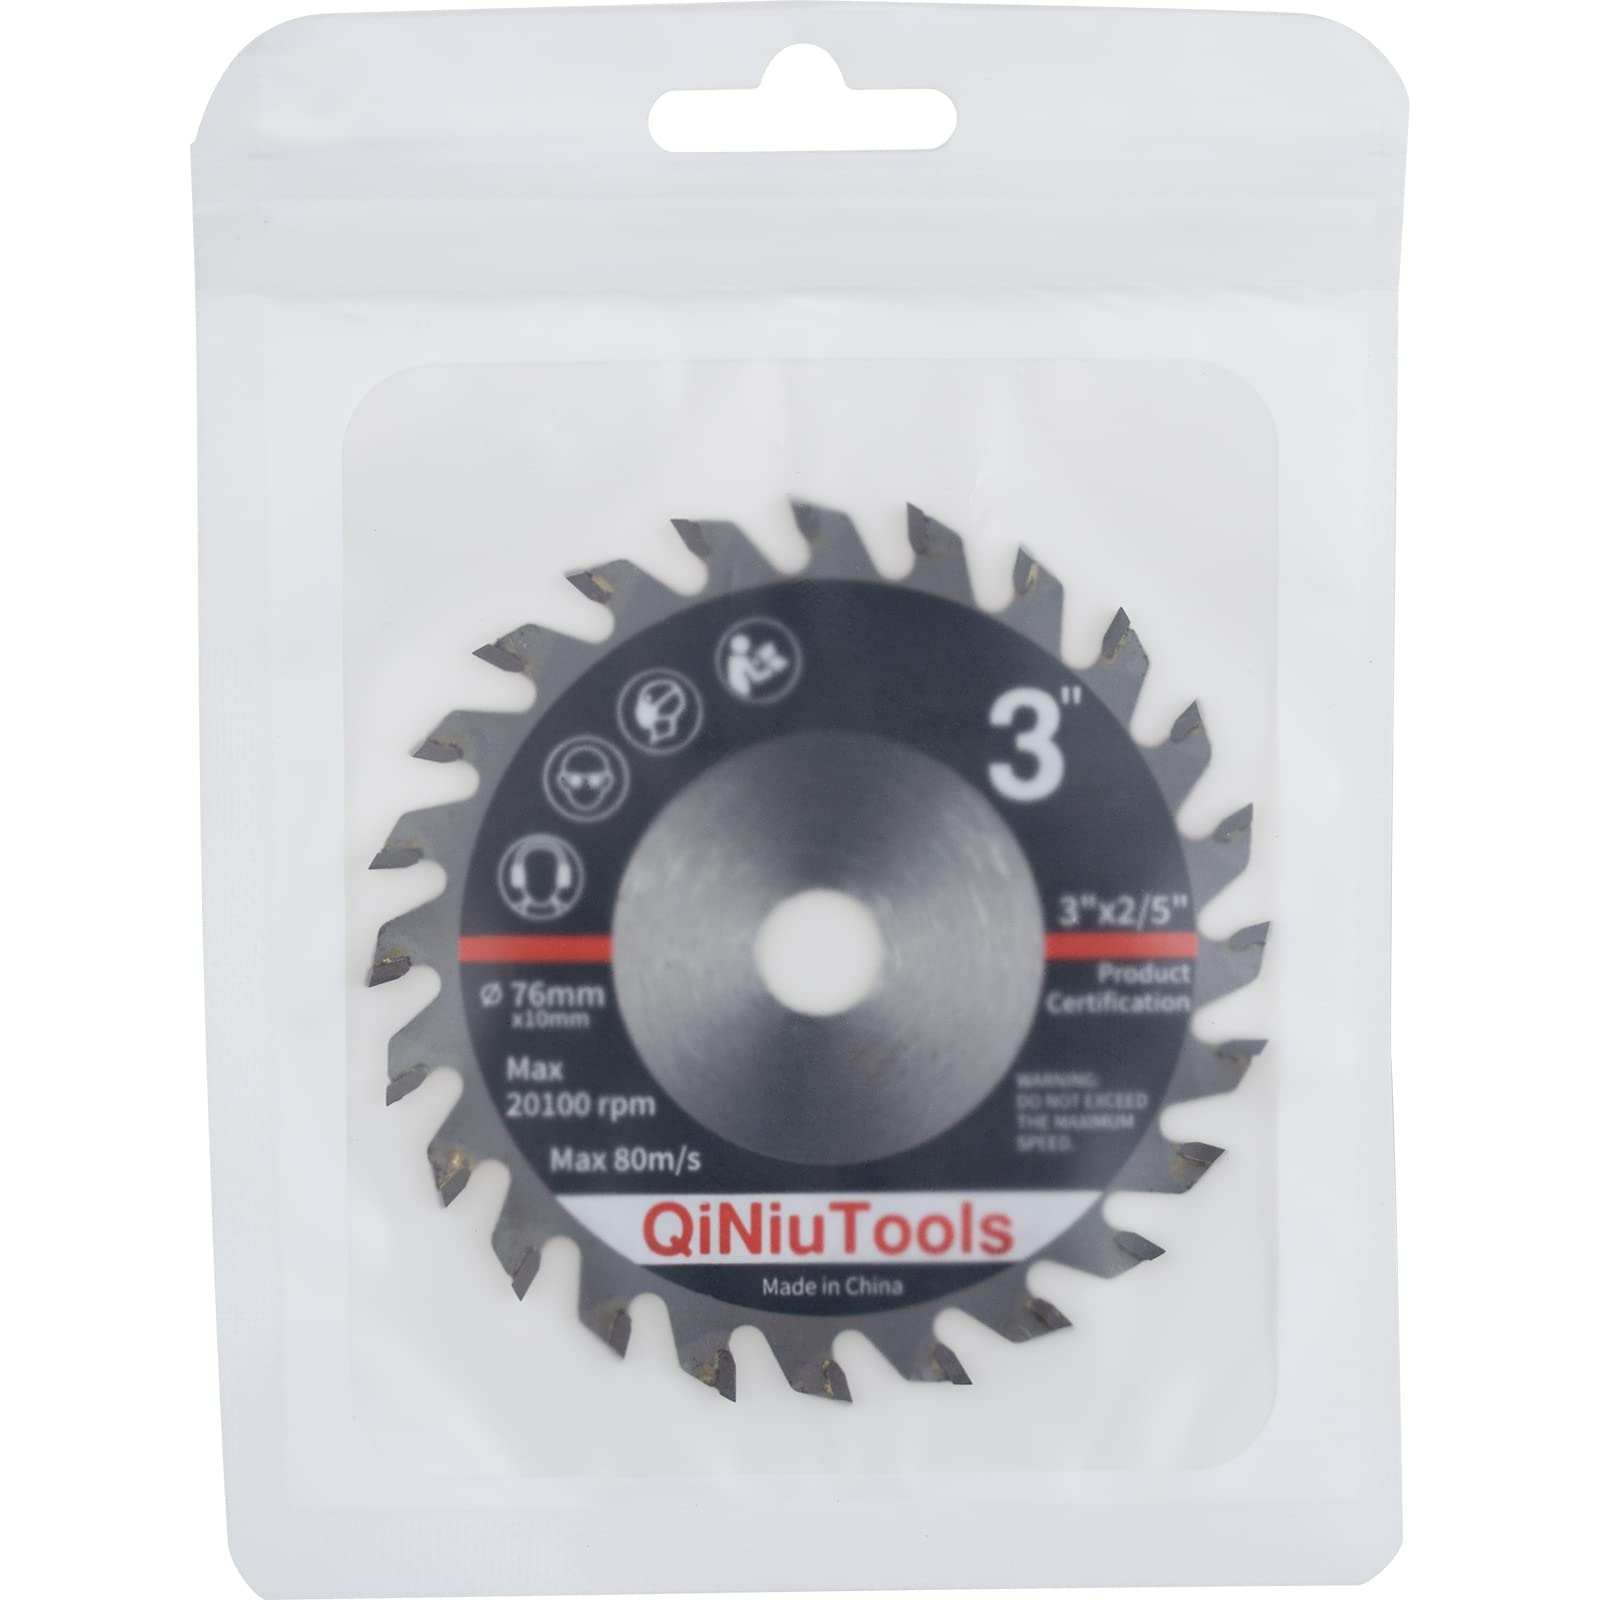 QiNiuTools 3 Inch 76mm 24-Tooth TCT Circular Saw Blade for Wood Plastic Composite Material Cutting